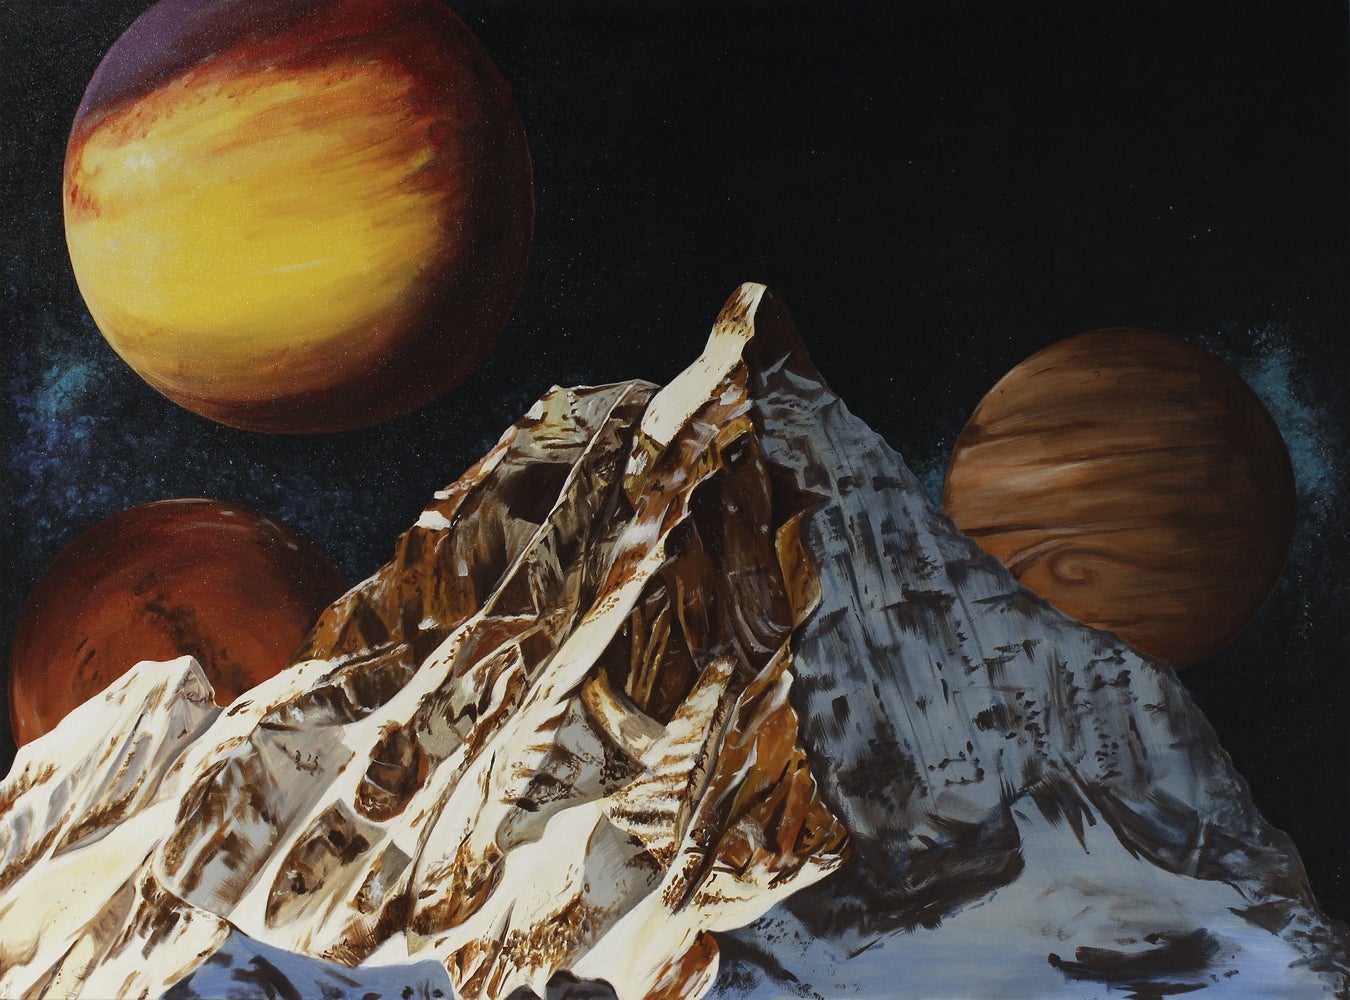 Painting of a cosmic landscape with snowy mountains in front of three brown and yellow planets